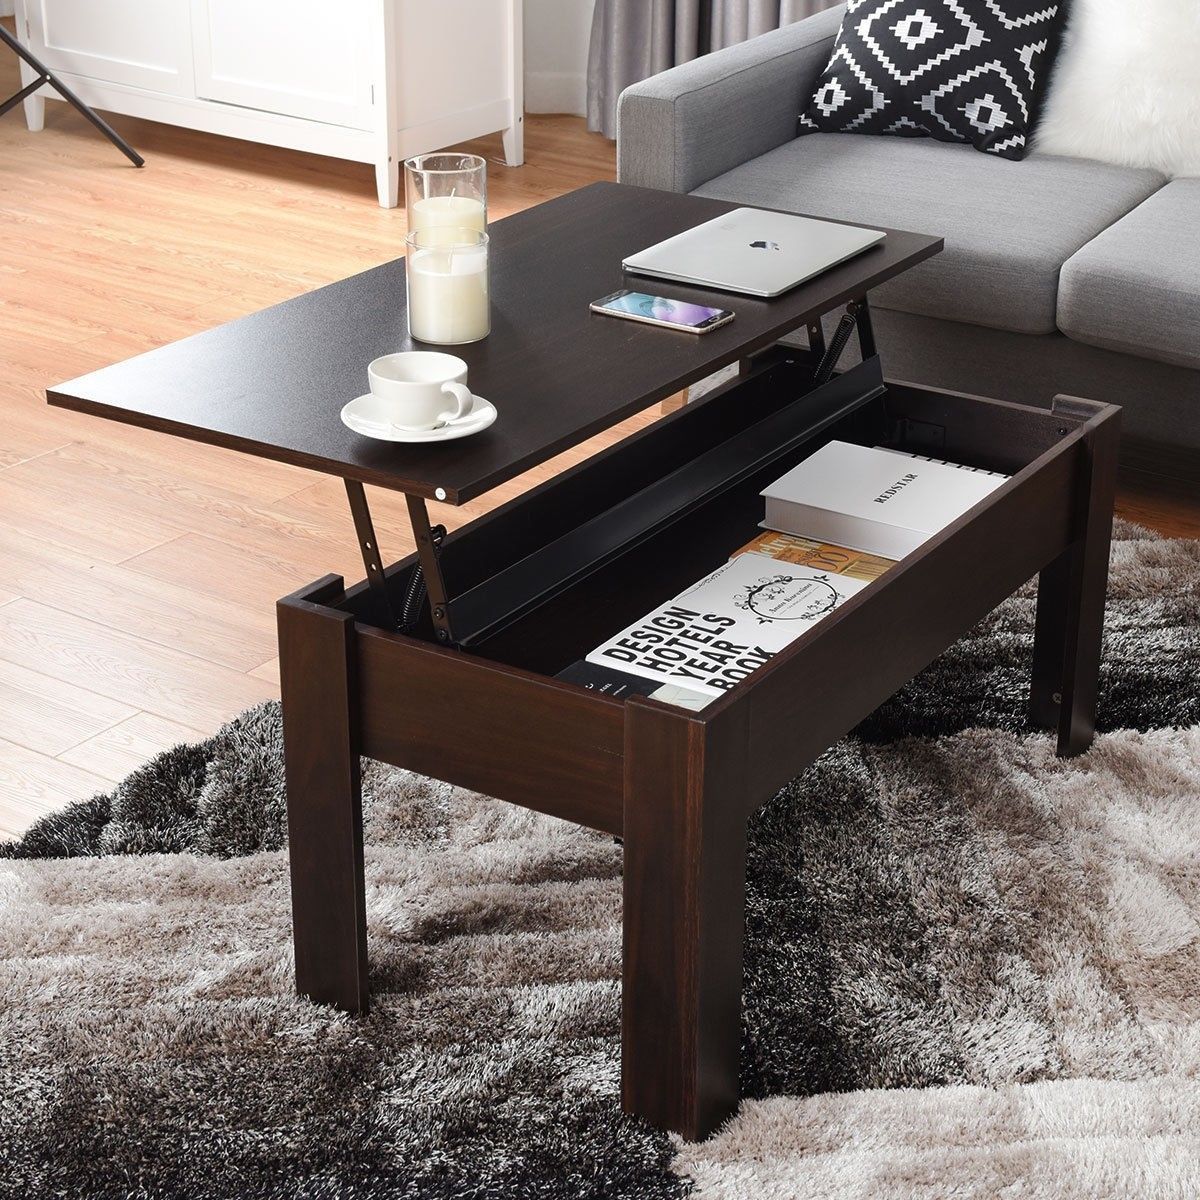 Modern Furniture Hidden Compartment Lift Tabletop Coffee Table | Coffee Pertaining To Modern Coffee Tables With Hidden Storage Compartments (View 9 of 20)